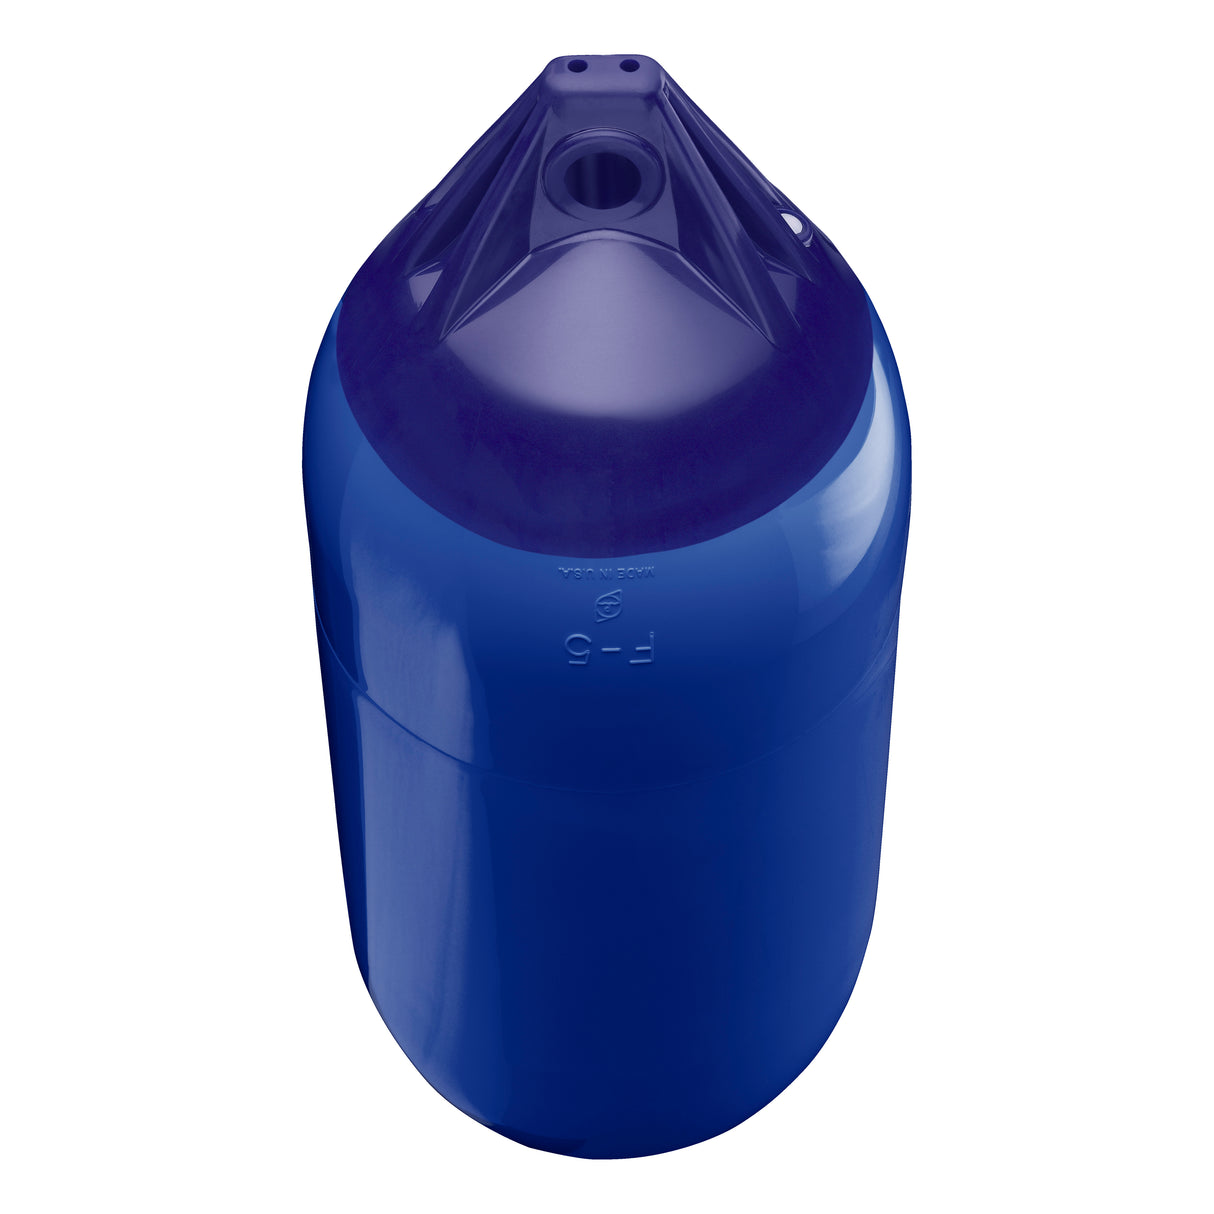 Cobalt Blue boat fender with Navy-Top, Polyform F-5 angled shot